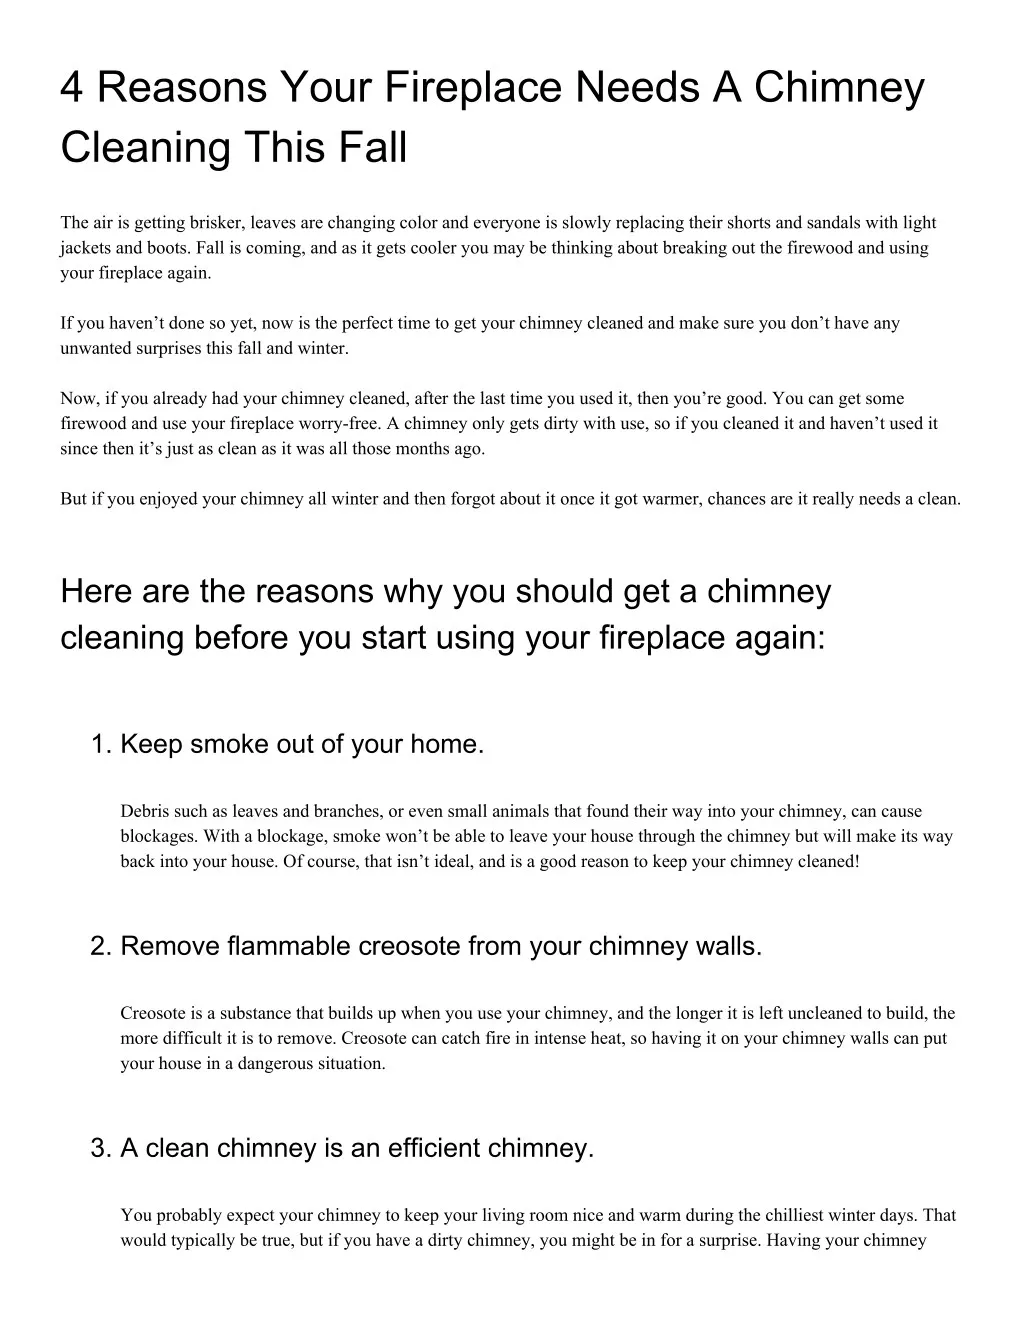 4 reasons your fireplace needs a chimney cleaning